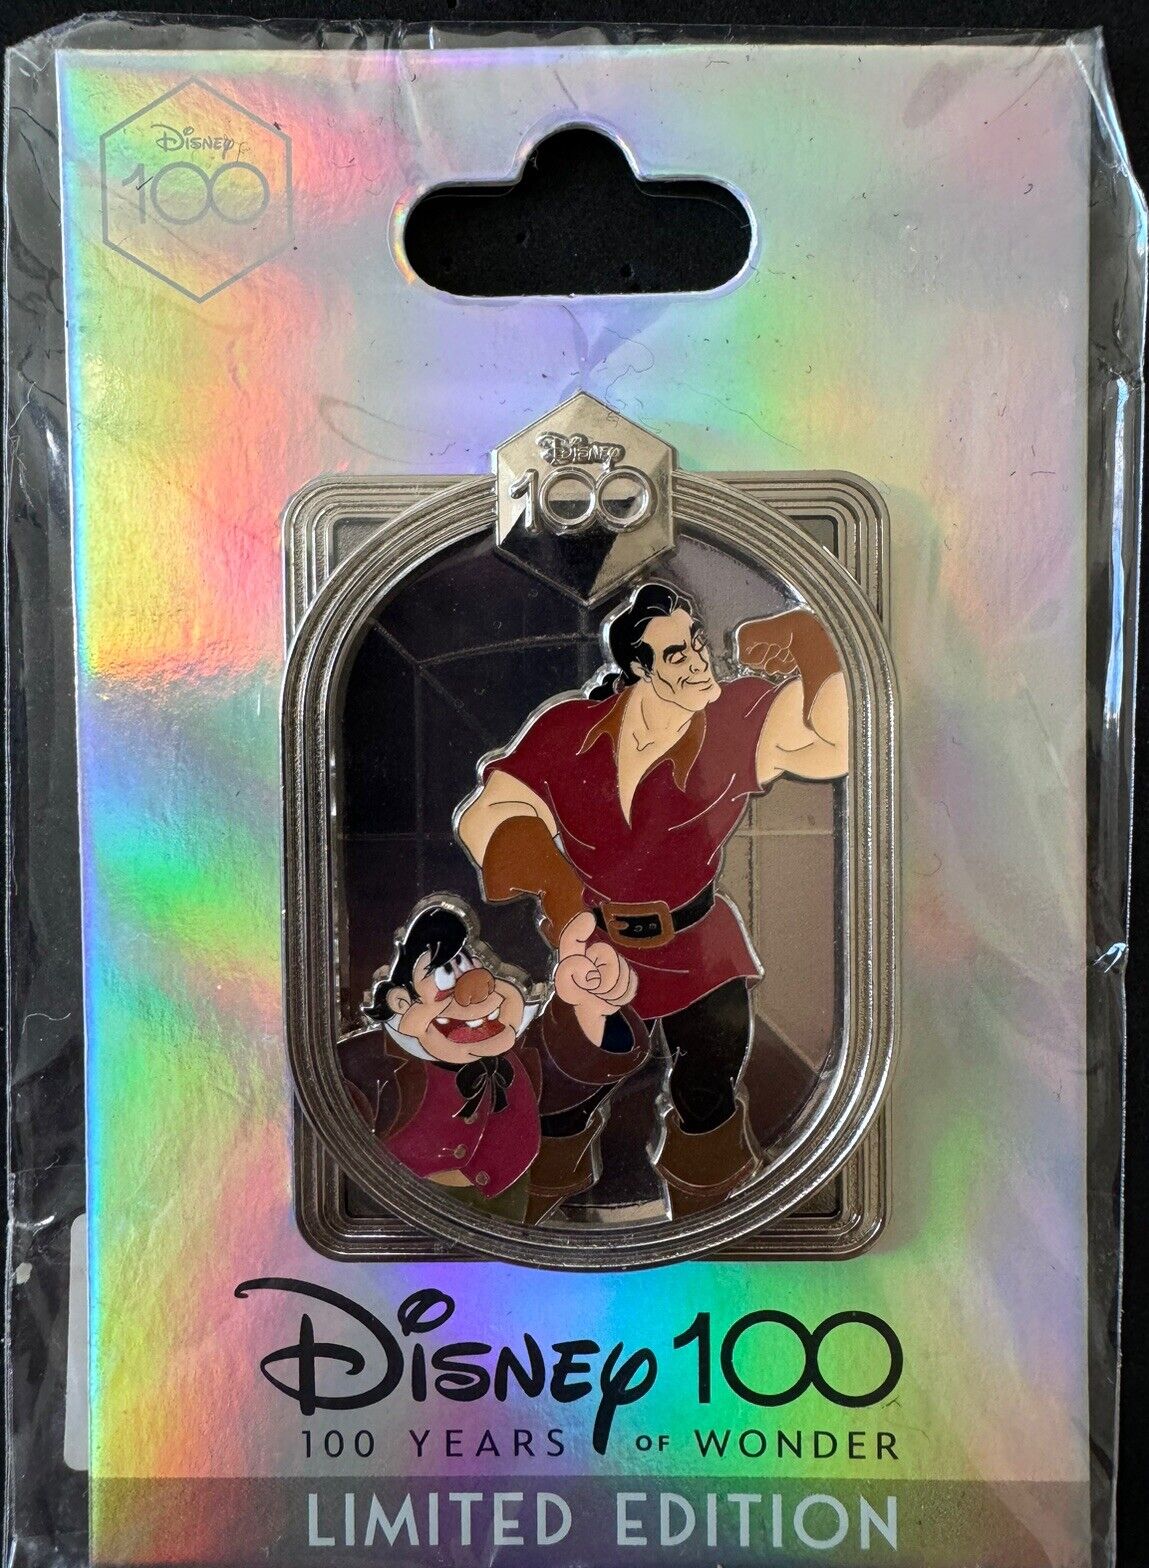 A4 Disney DEC 100 Years Of Wonder LE Pin Beauty and the Beast Gaston Lefou